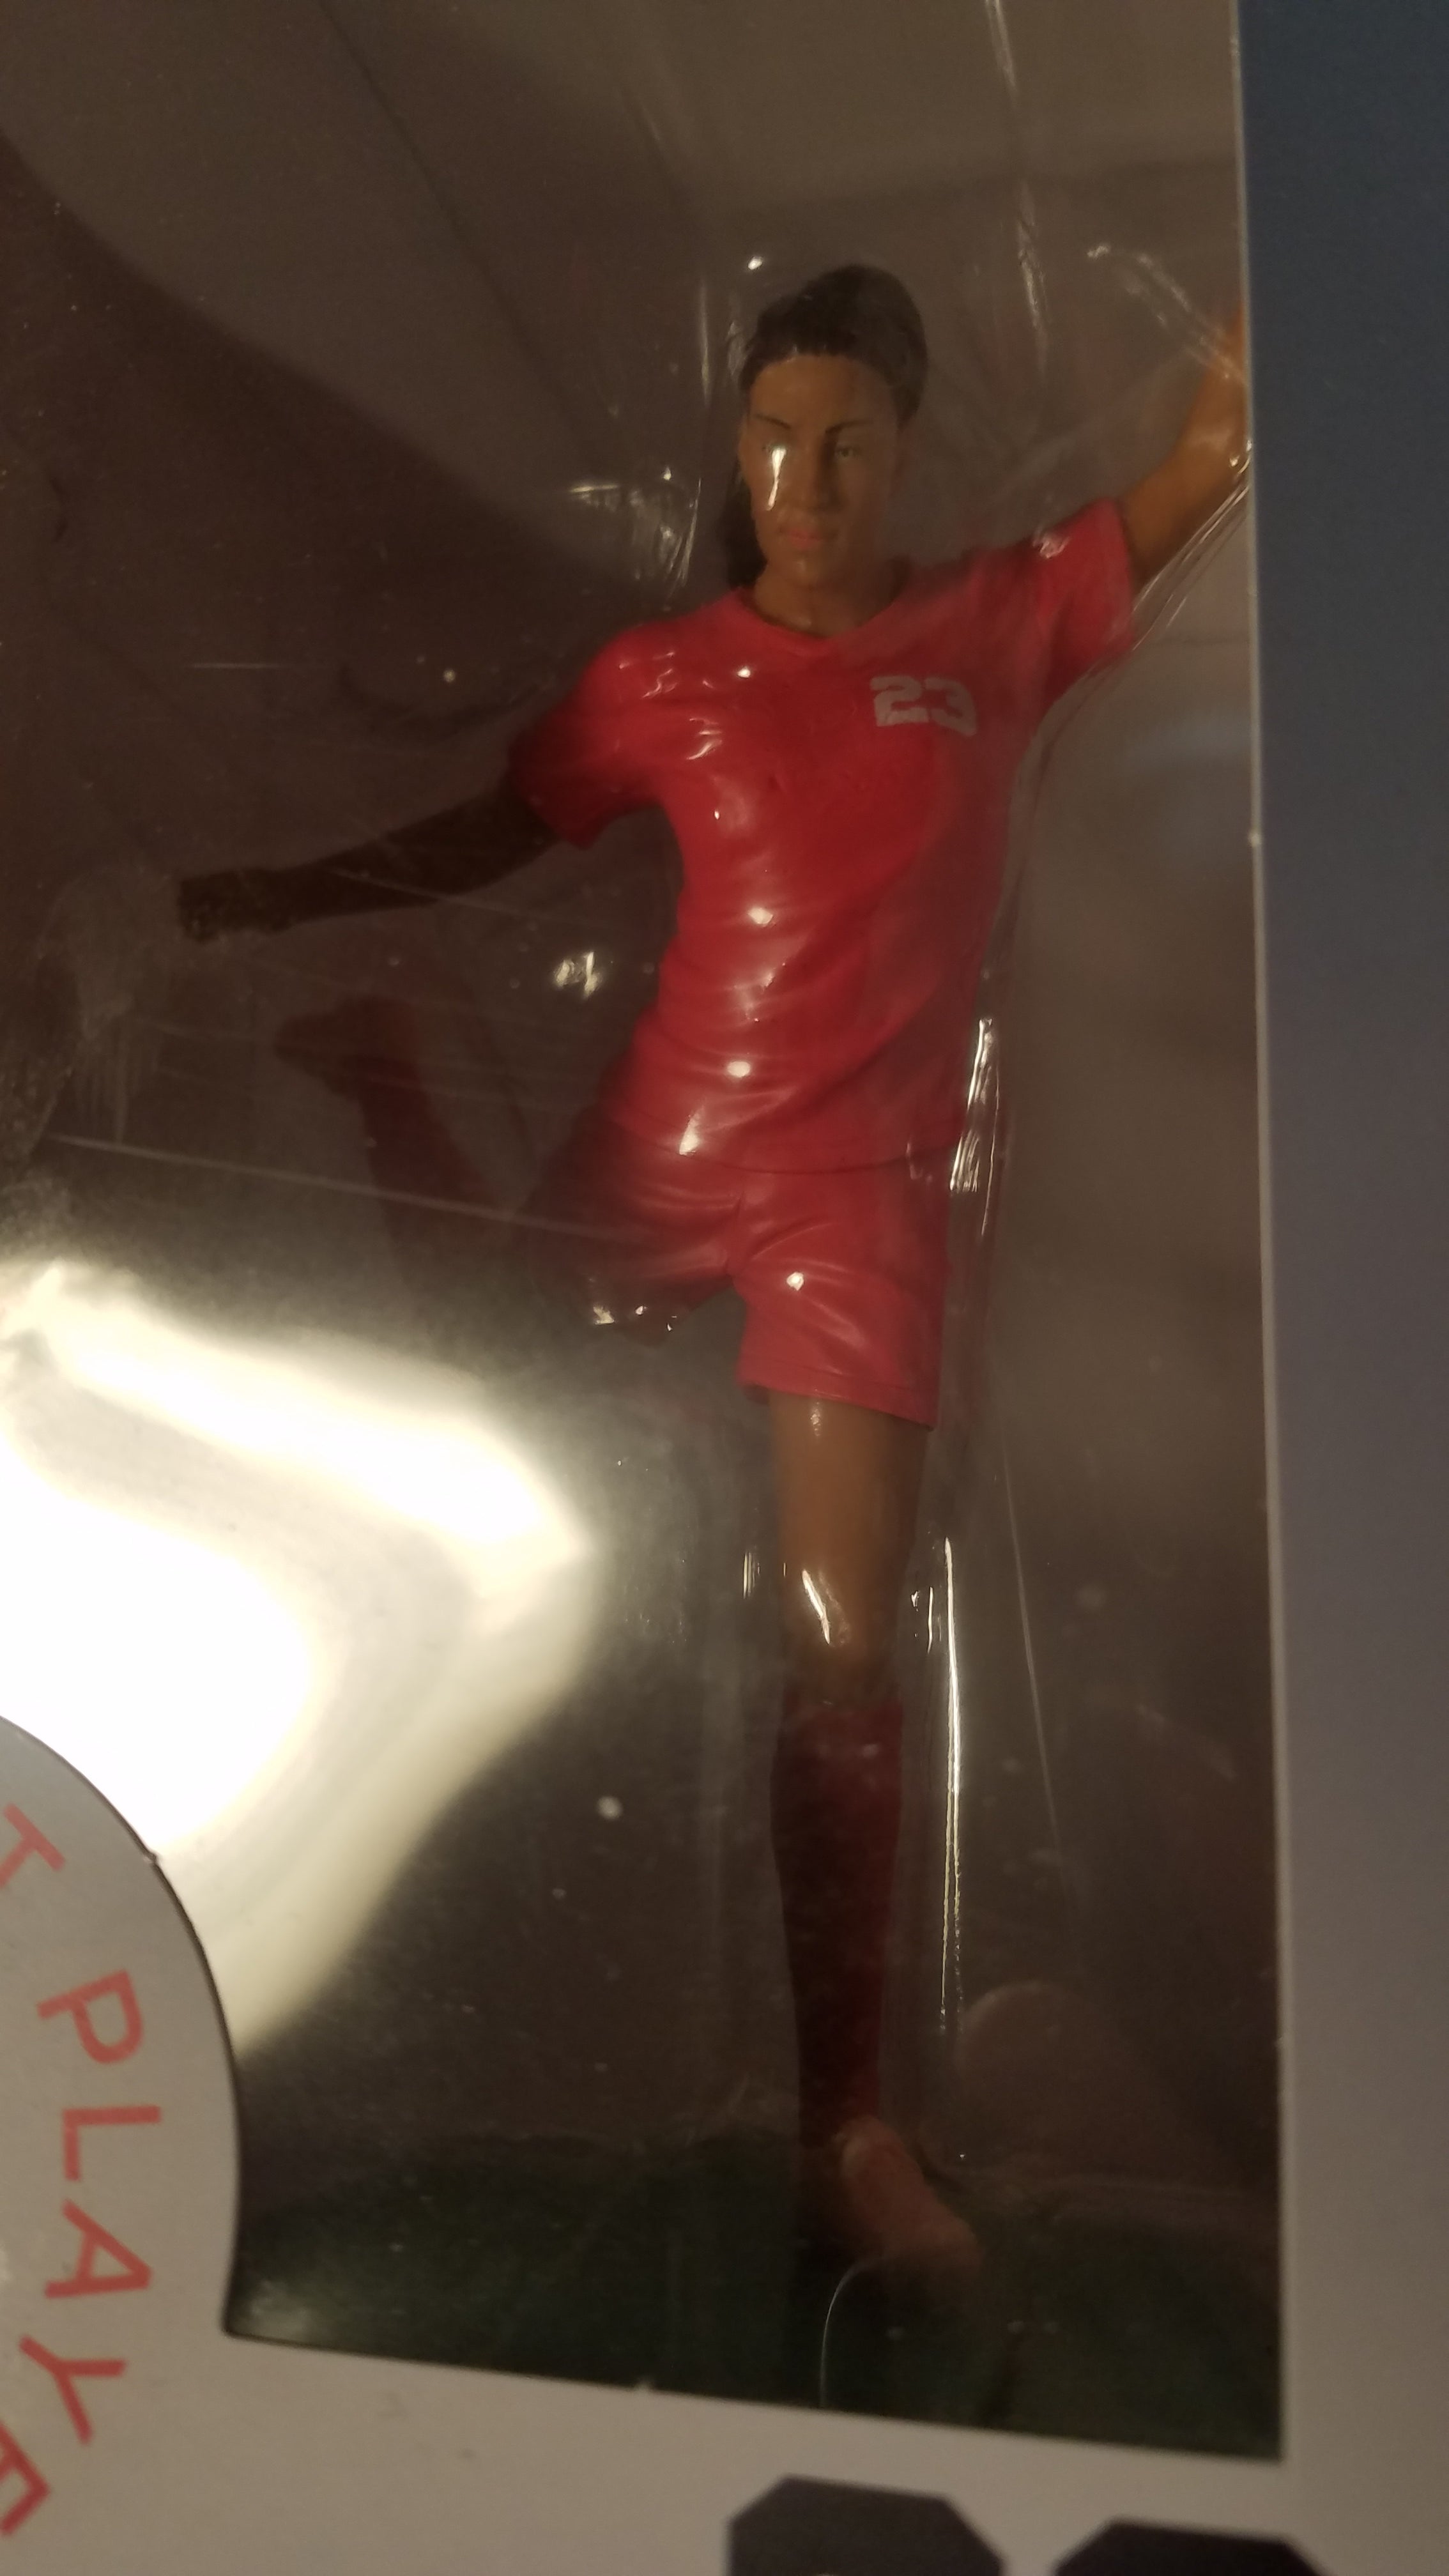 USWNT Women's World Cup Soccer Collectible Figures christen press free shipping